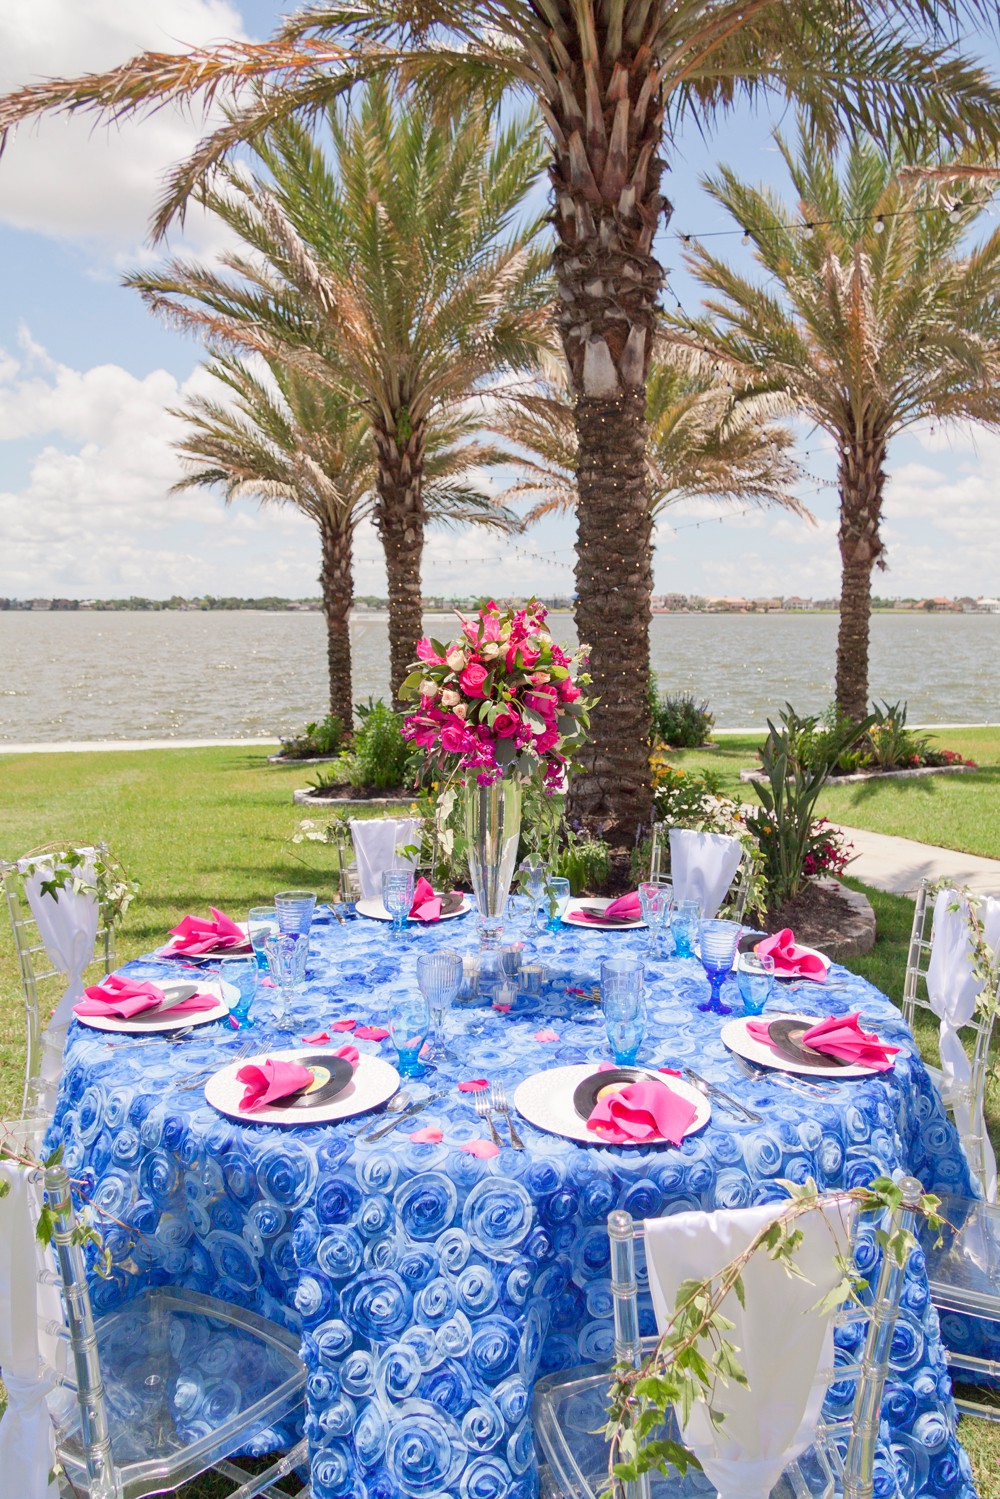 Tall wedding centerpiece with hot pink roses on a cobalt blue table cloth